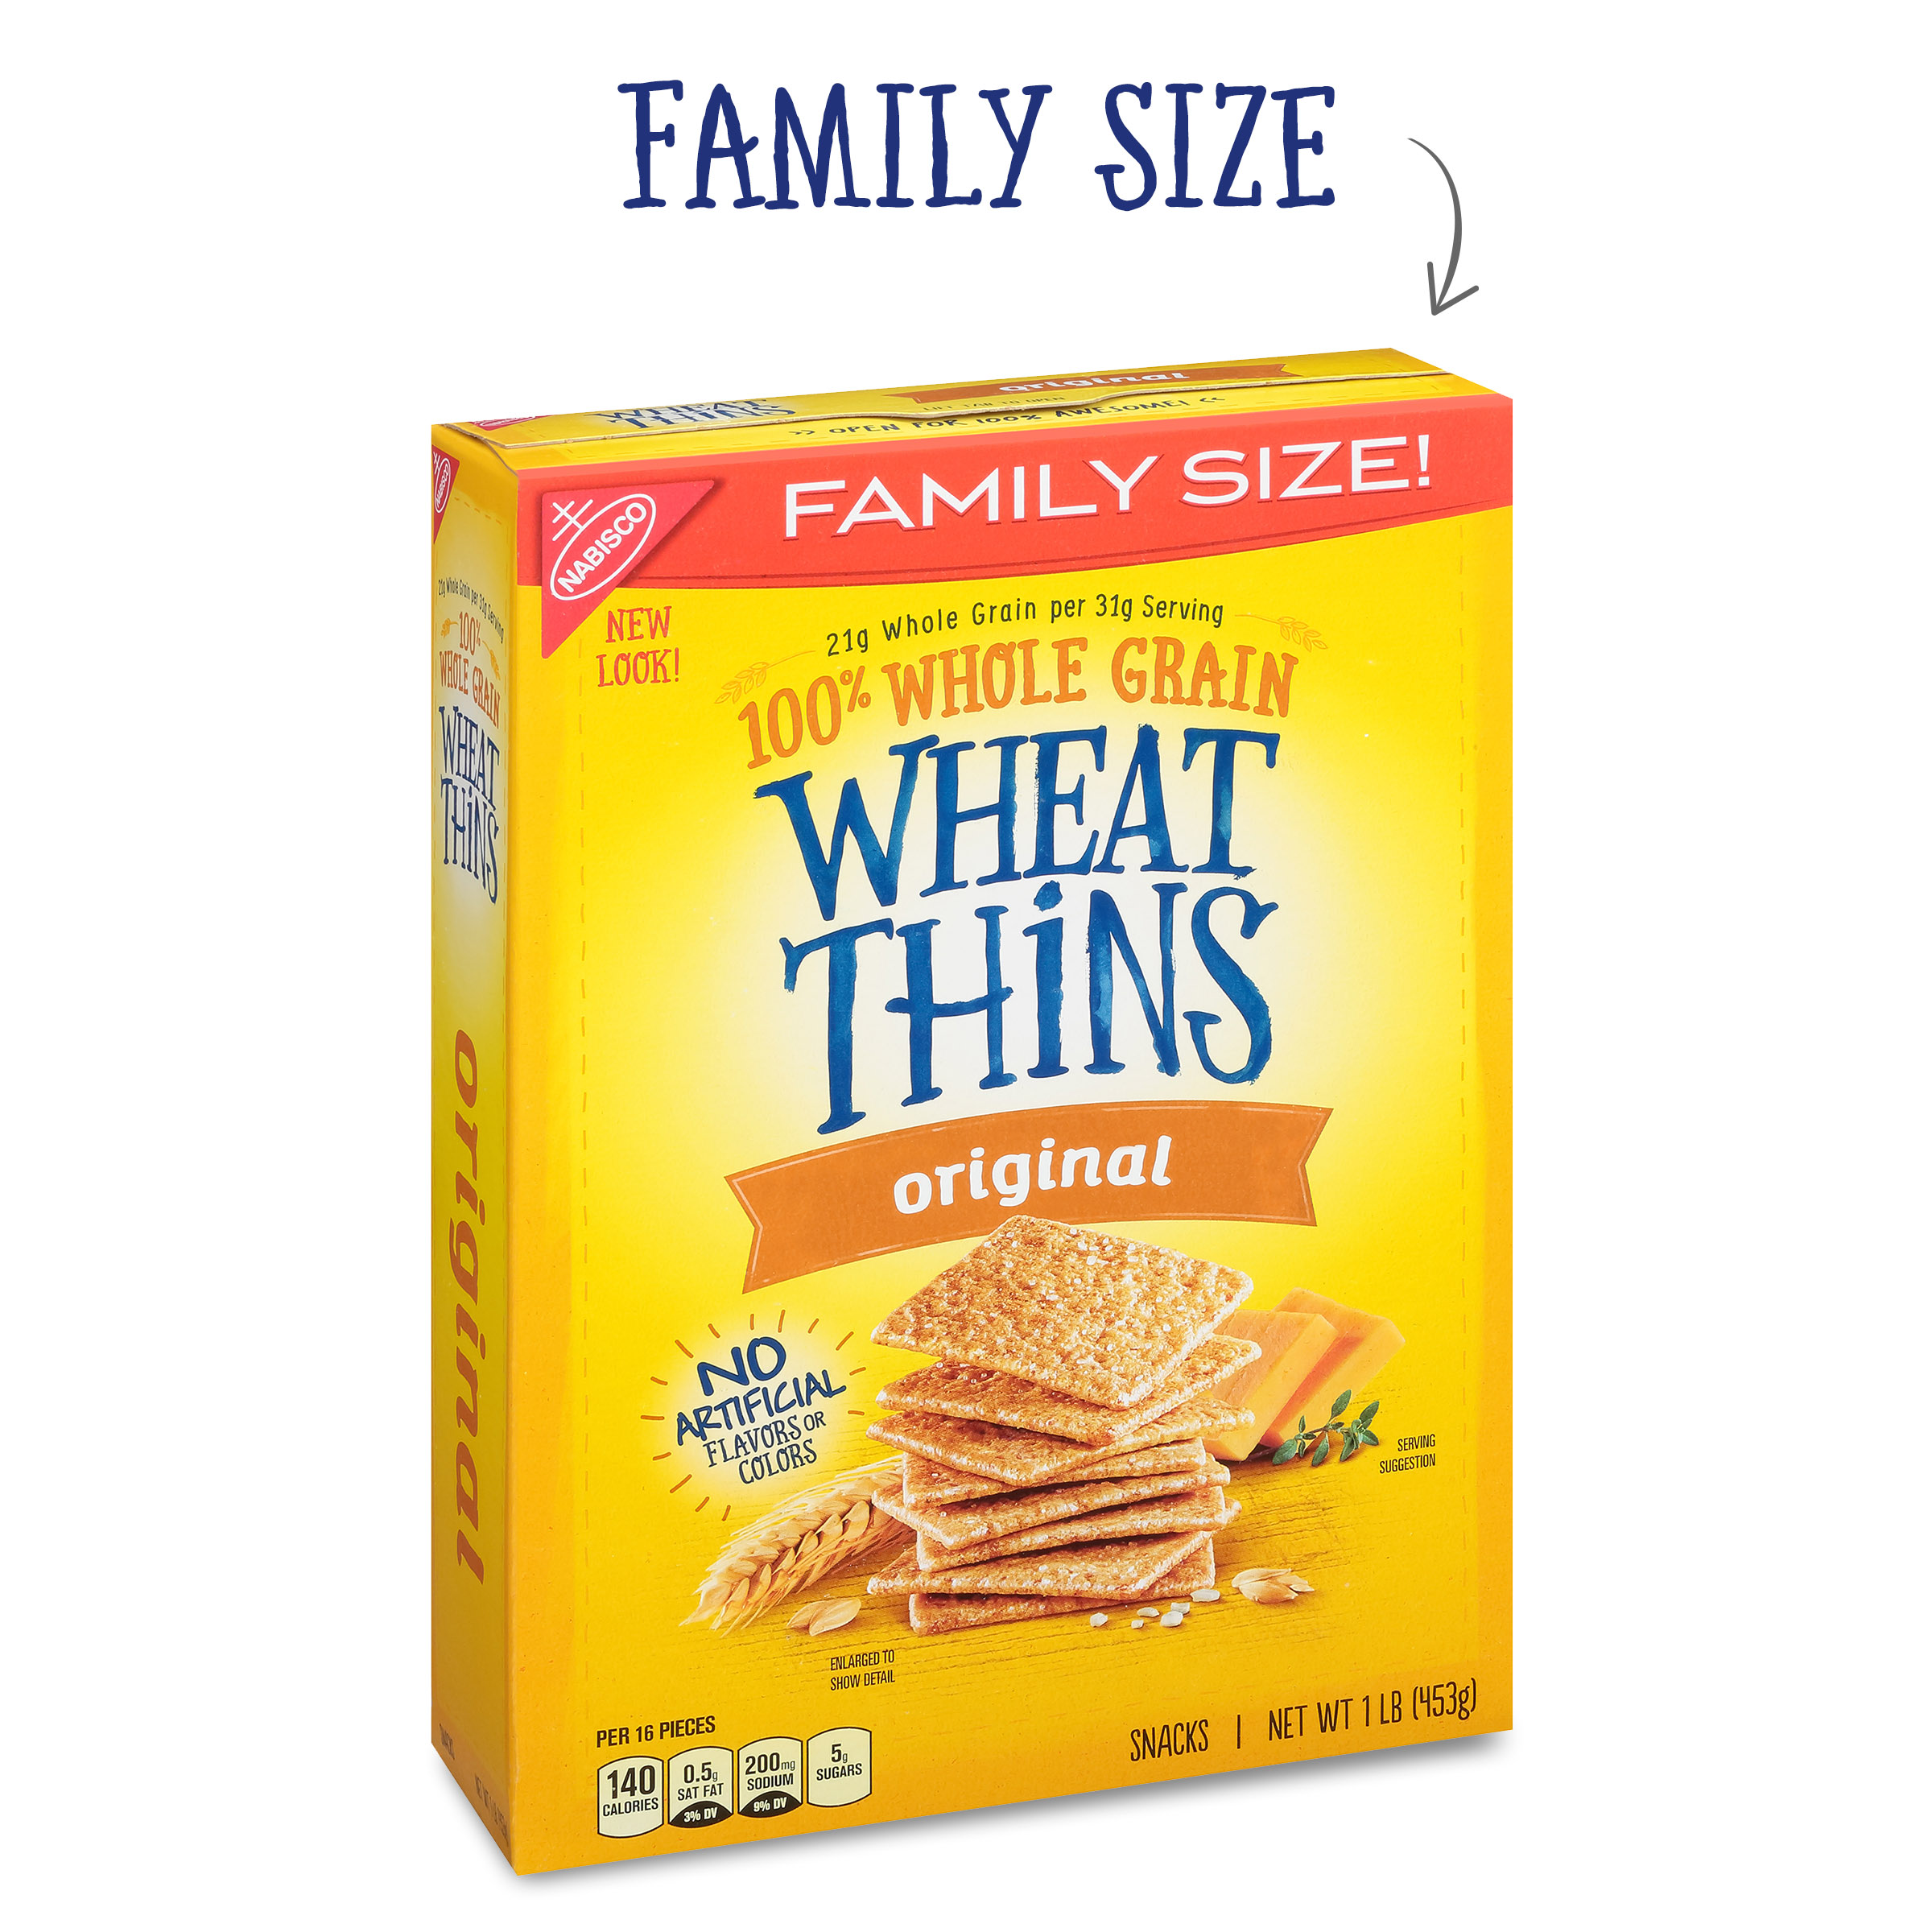 Wheat Thins Original Whole Grain Wheat Crackers, Family Size, 16 oz - image 3 of 16